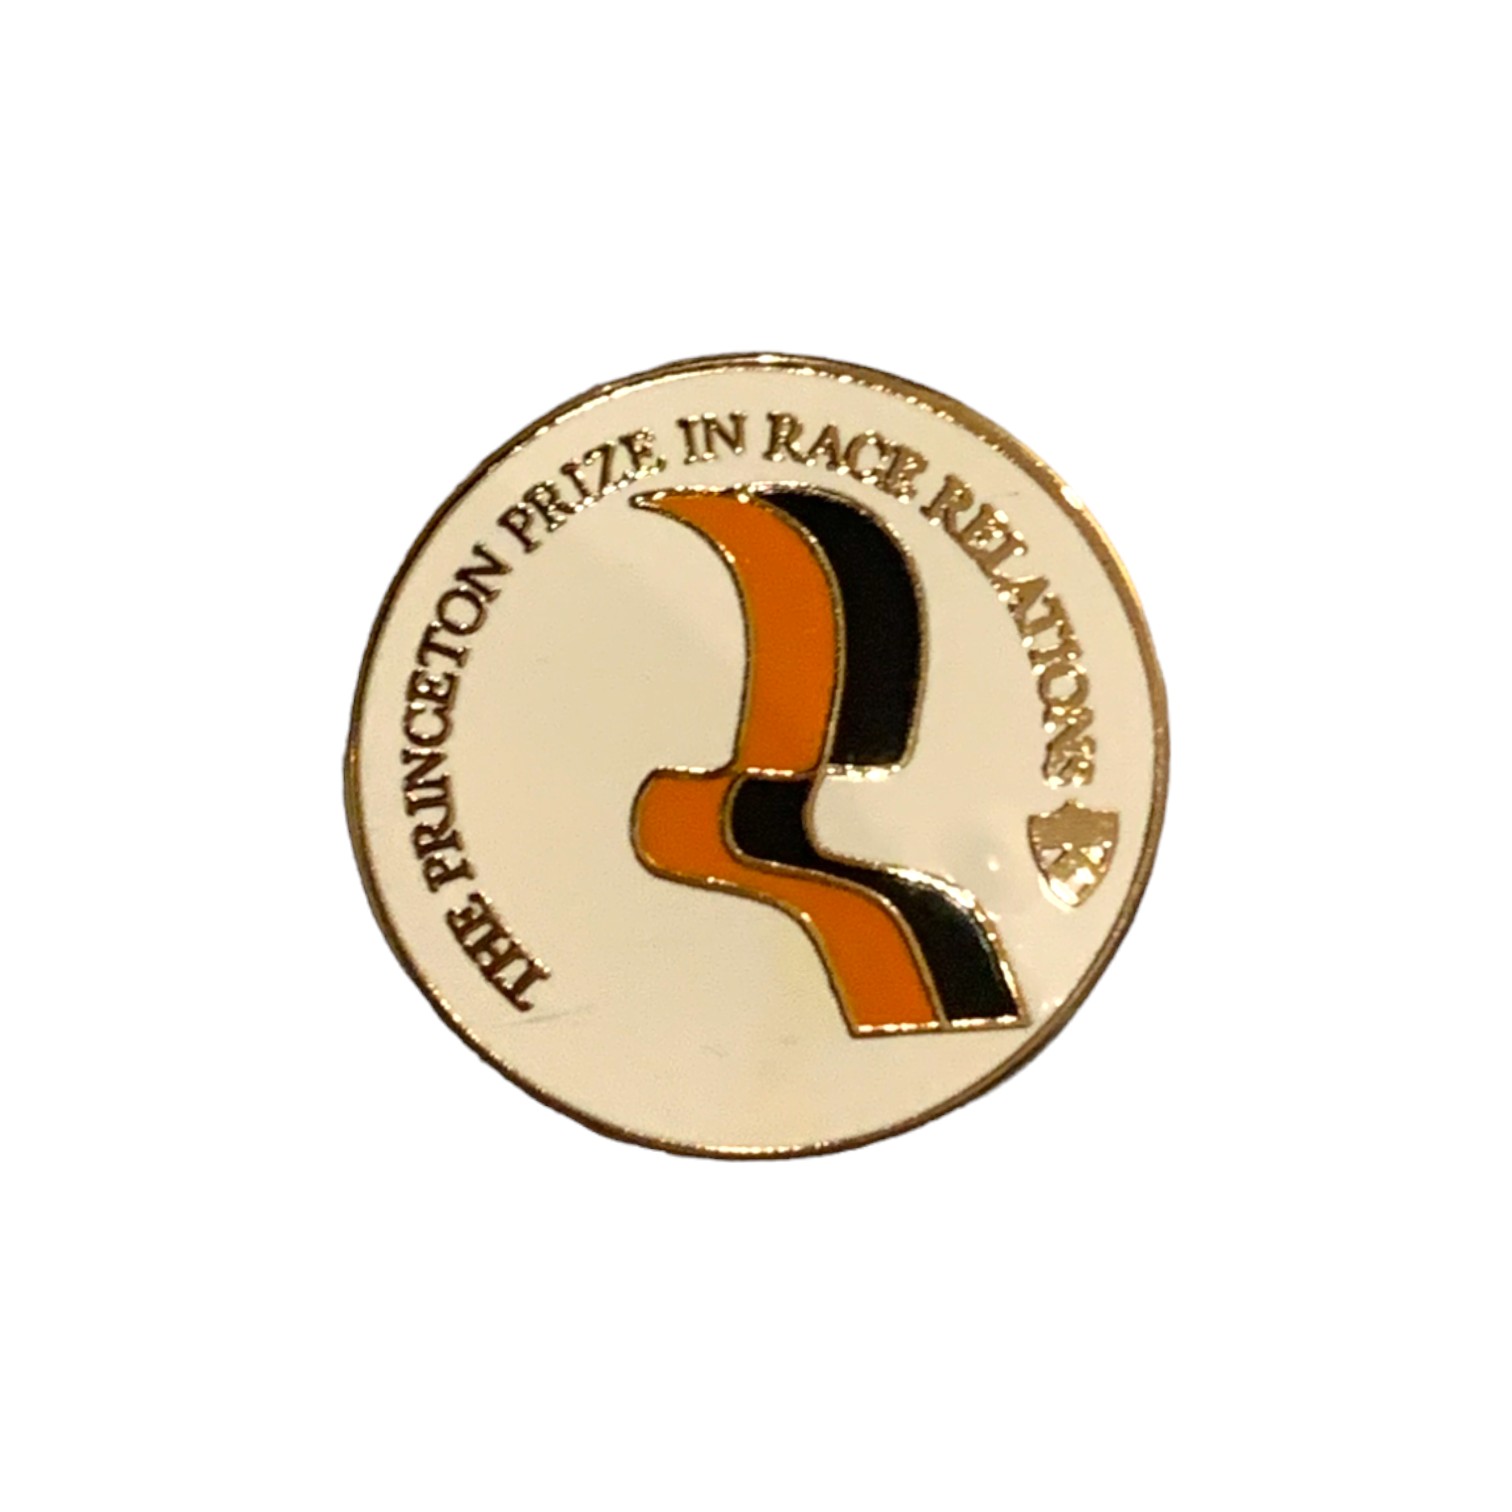 Princeton Prize in Race Relations 15th Anniversary Pin